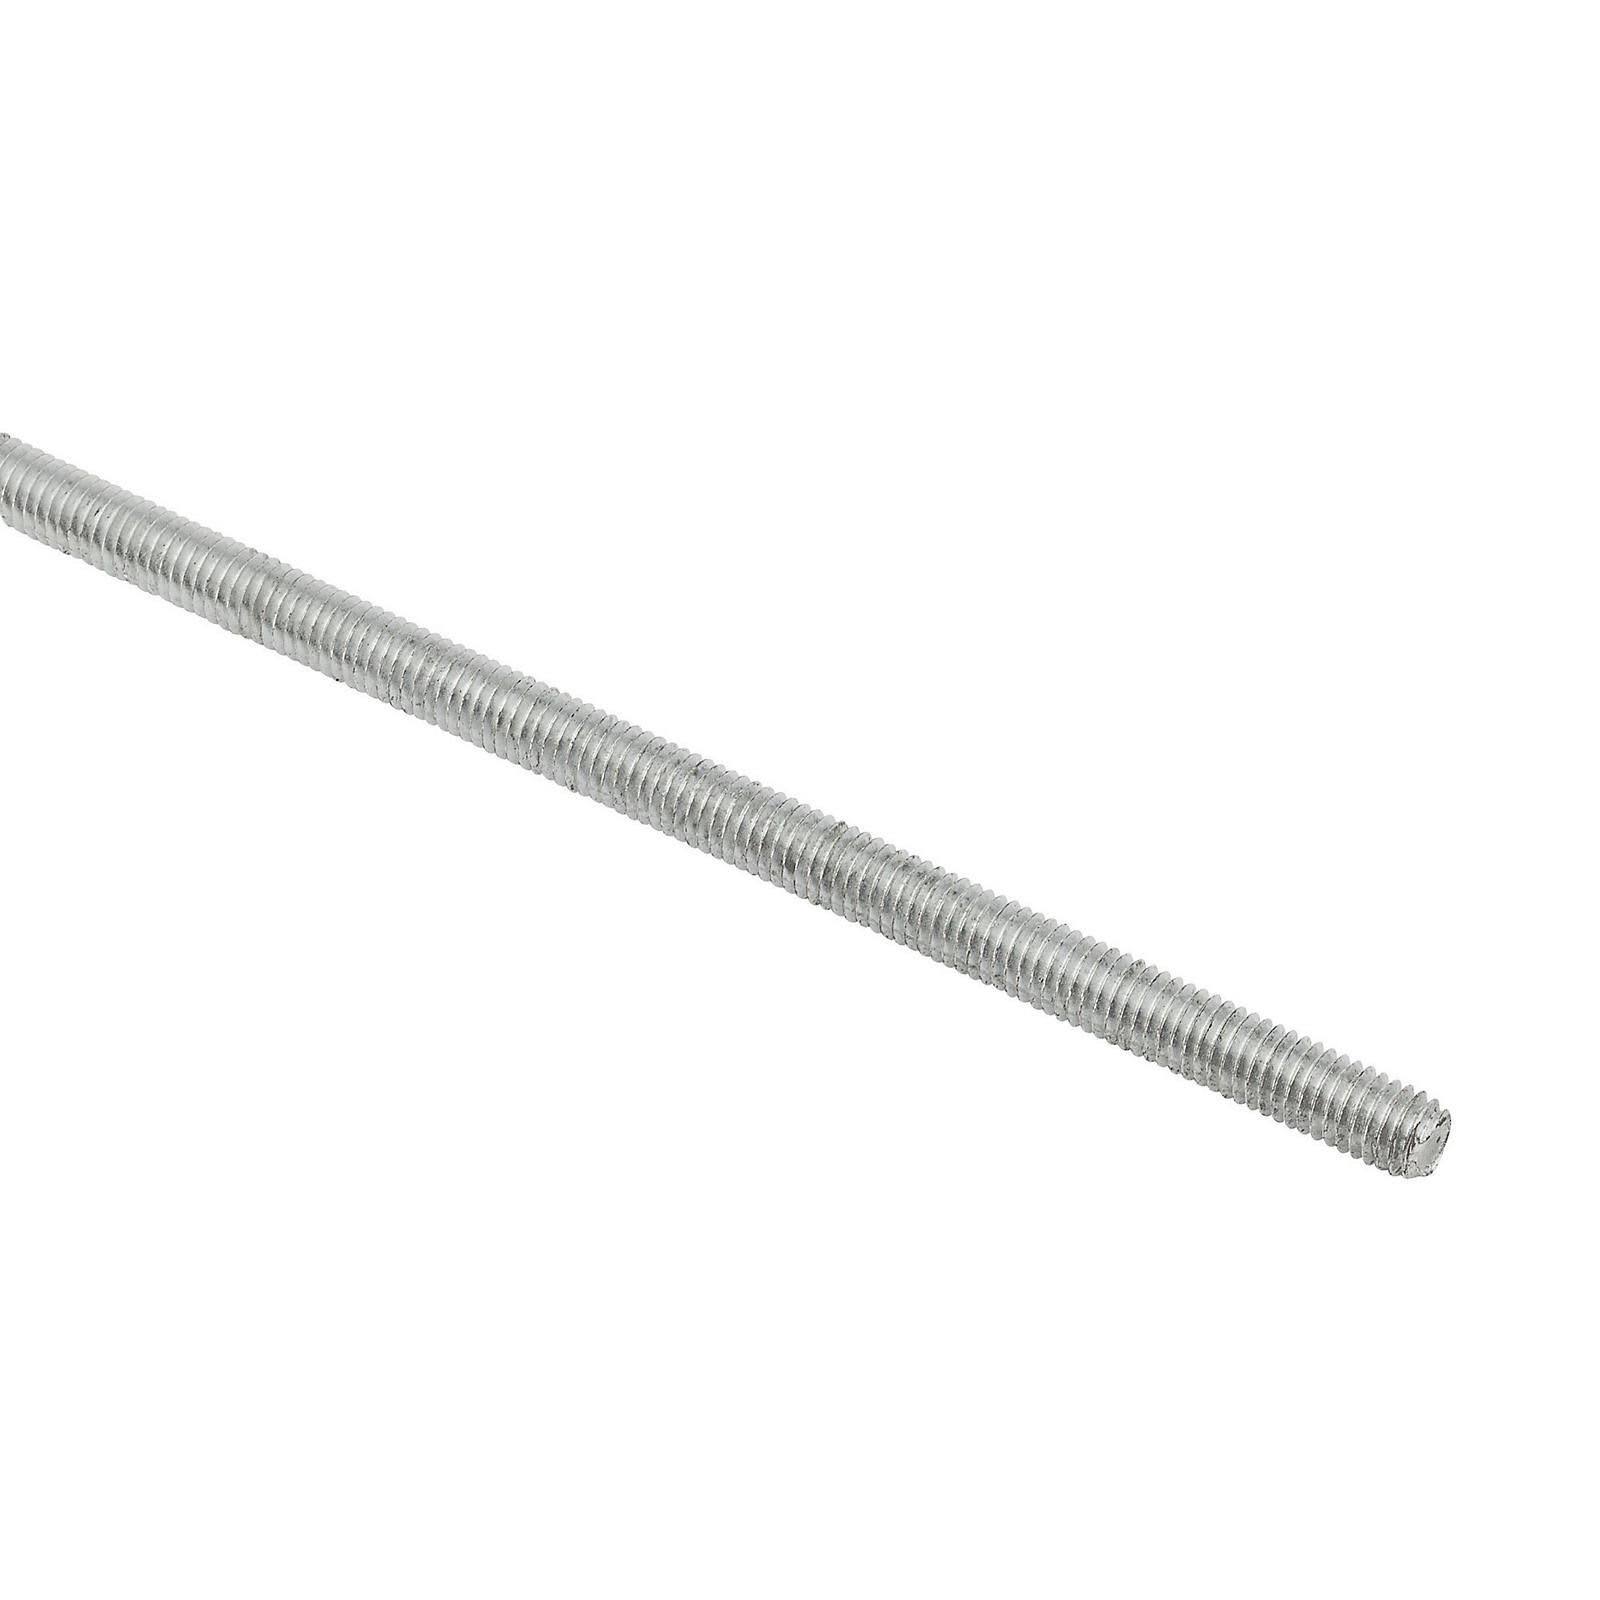 National Hardware 4035BC Steel Threaded Rod - Zinc Plated, 8mm x 1mm